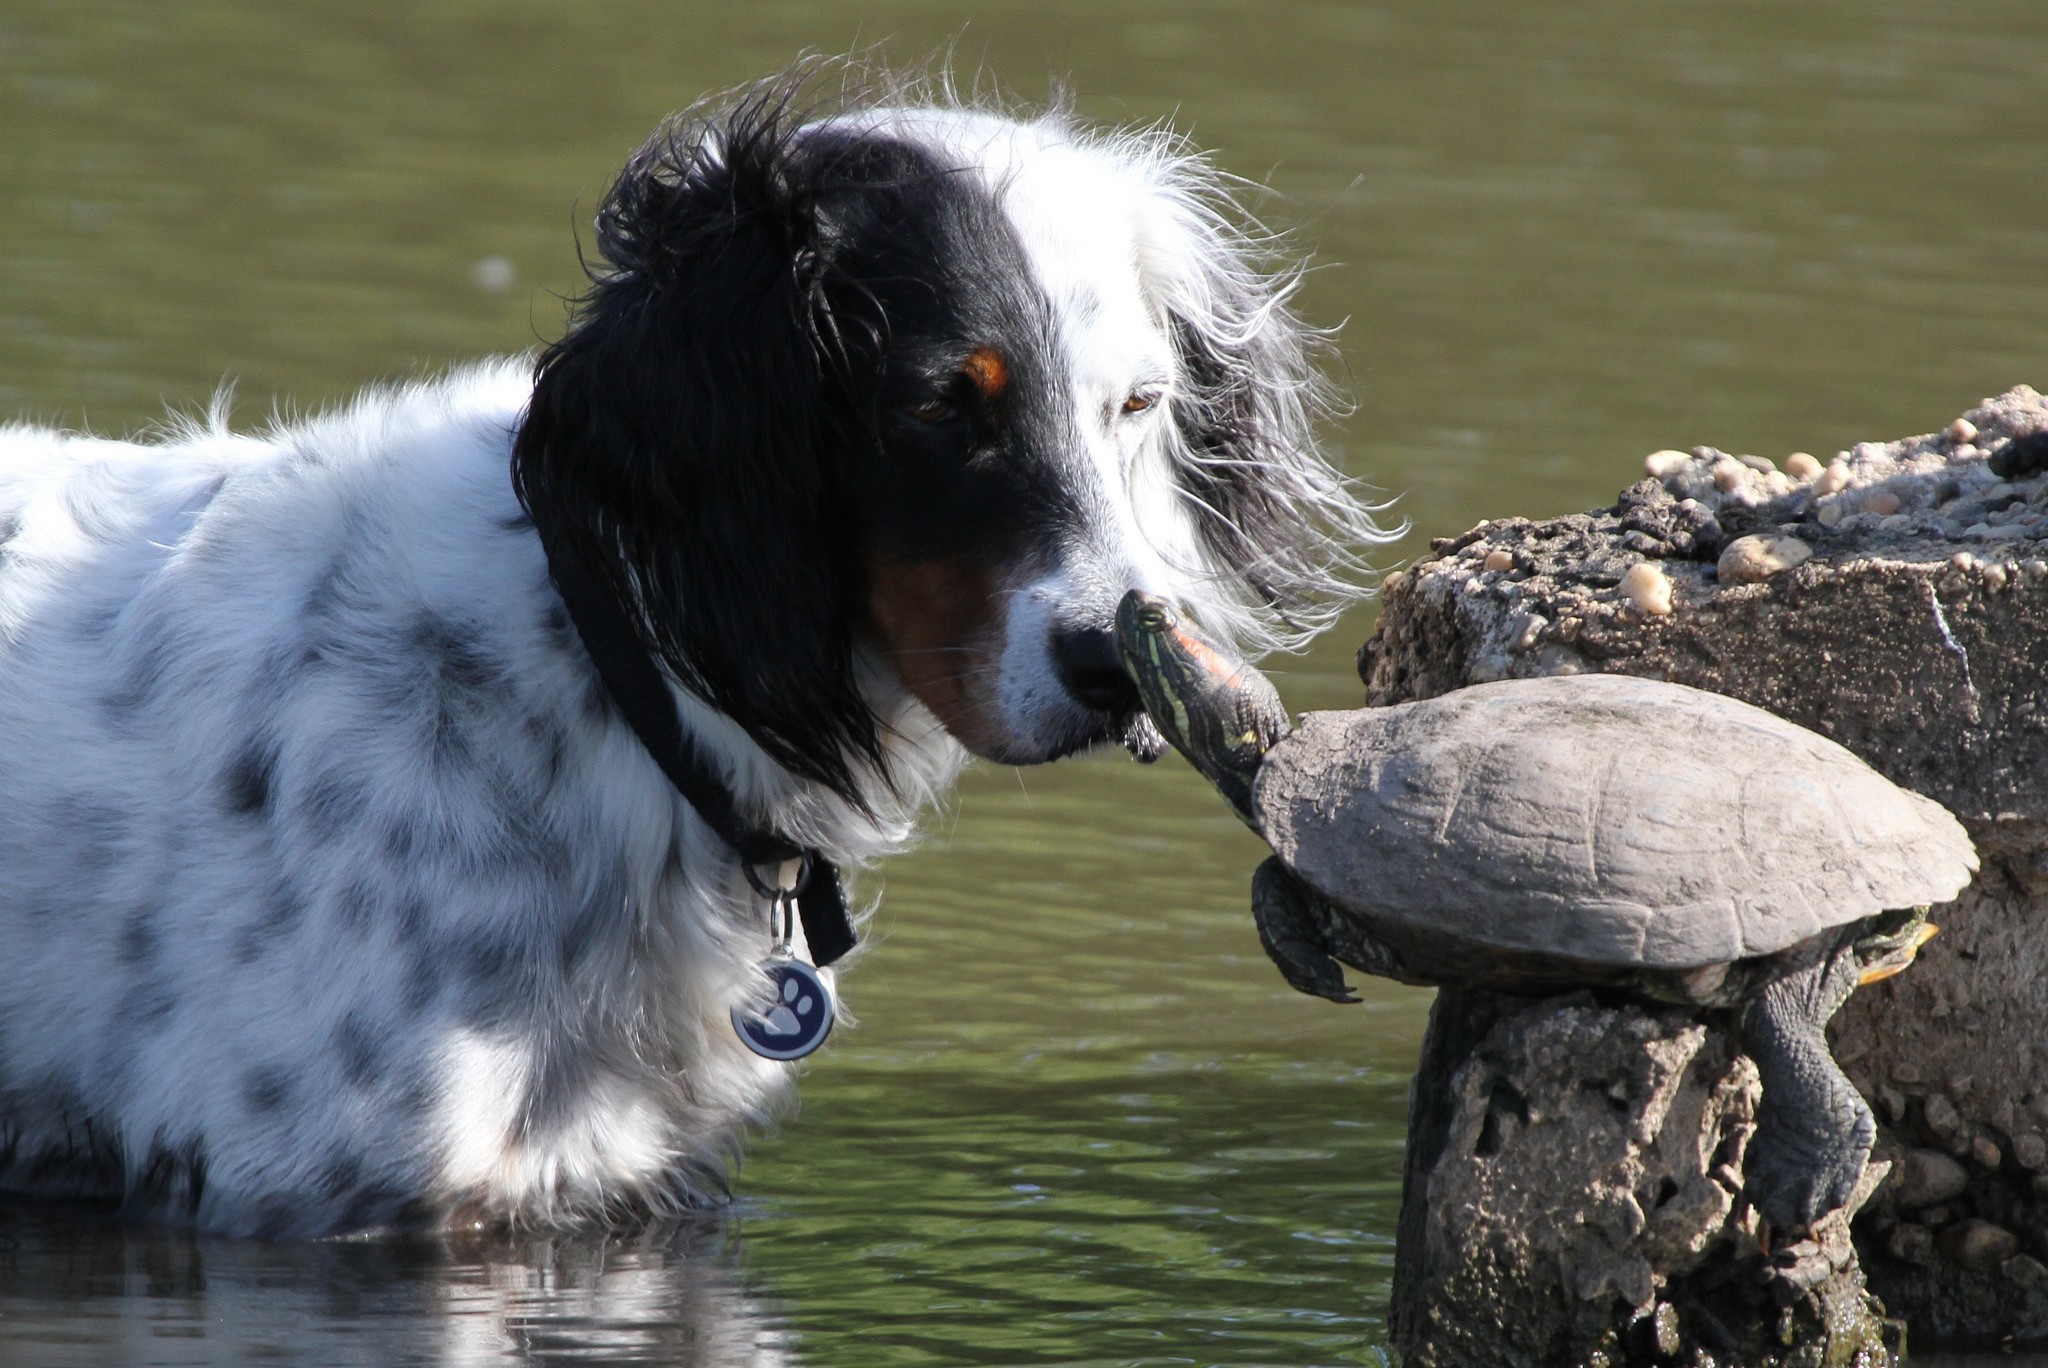 General 2048x1368 dog turtle water animals outdoors in water